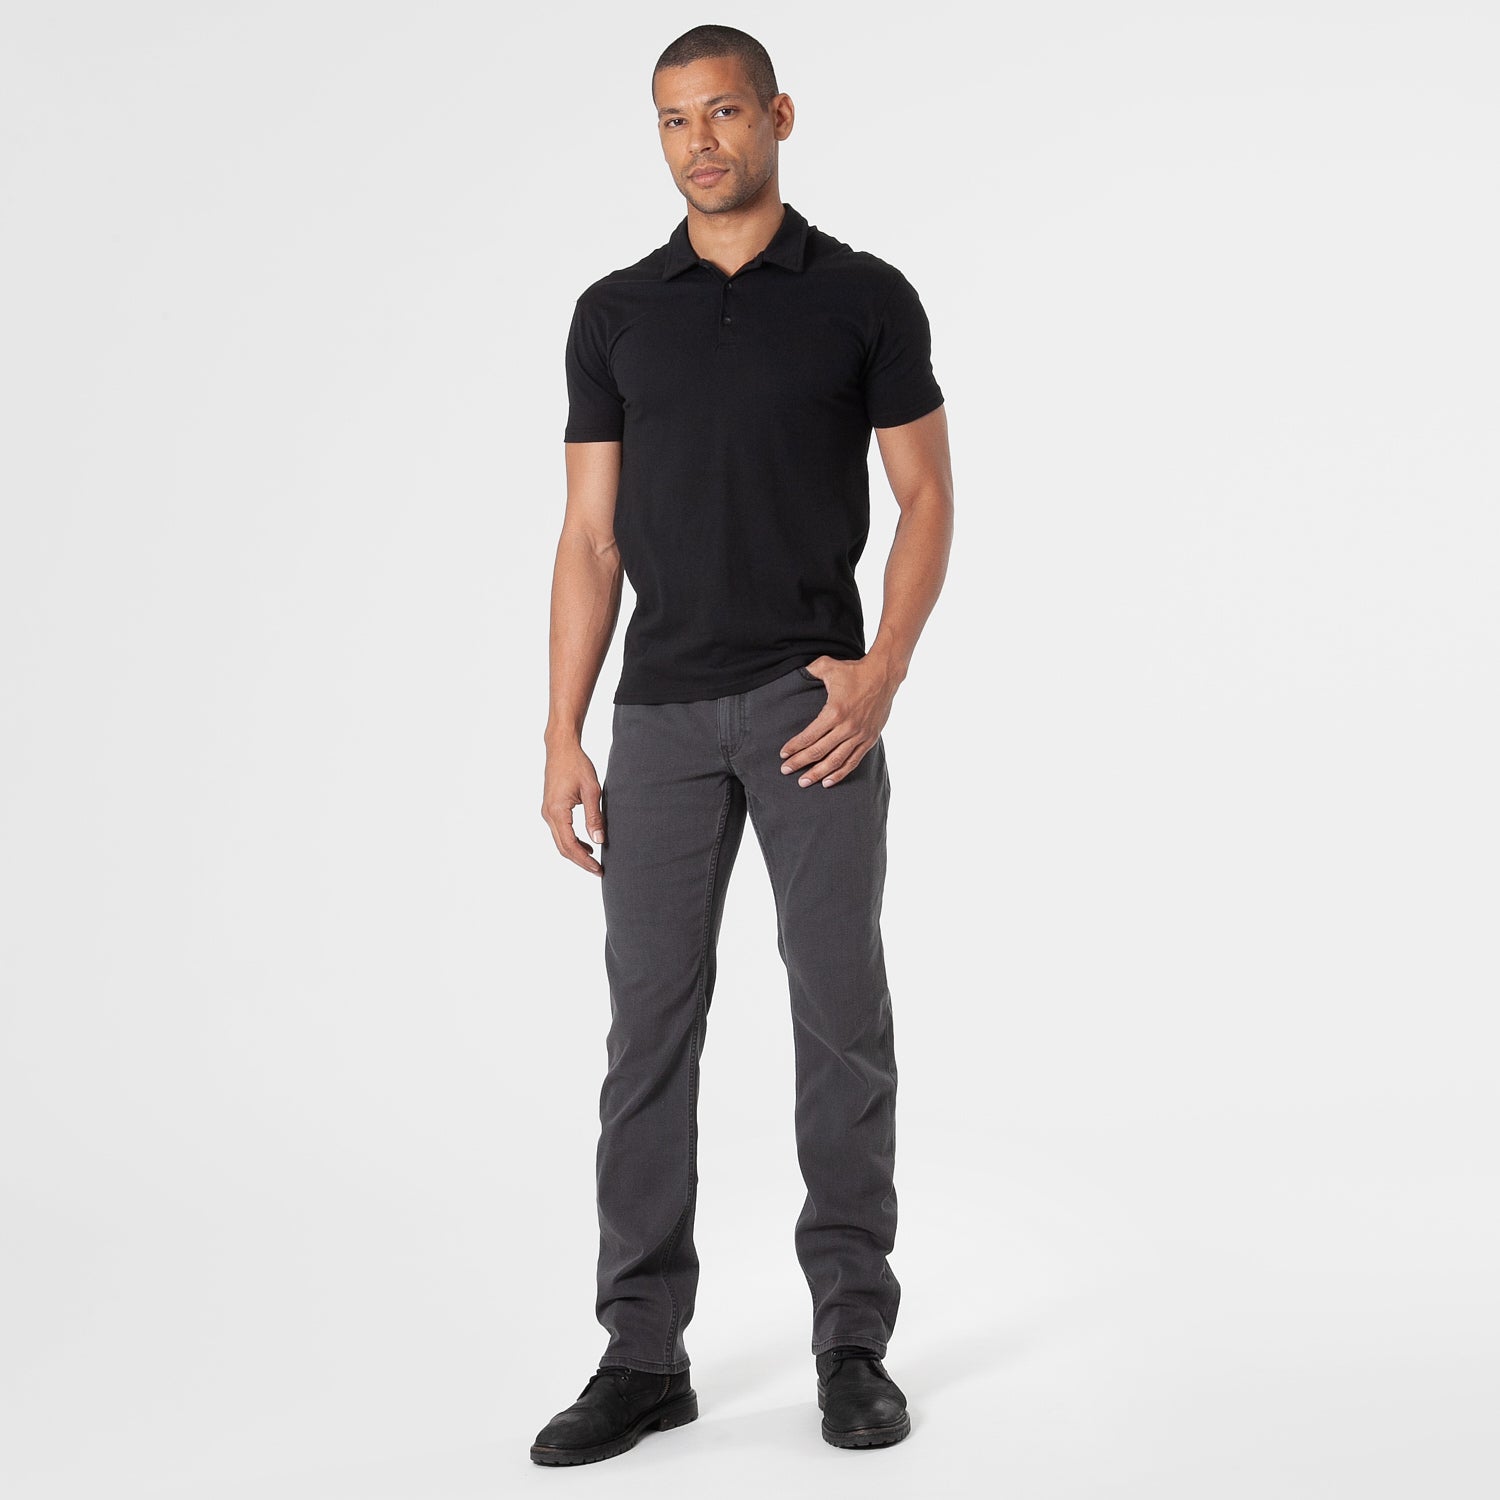 Gray Wash Straight Fit Comfort Jeans